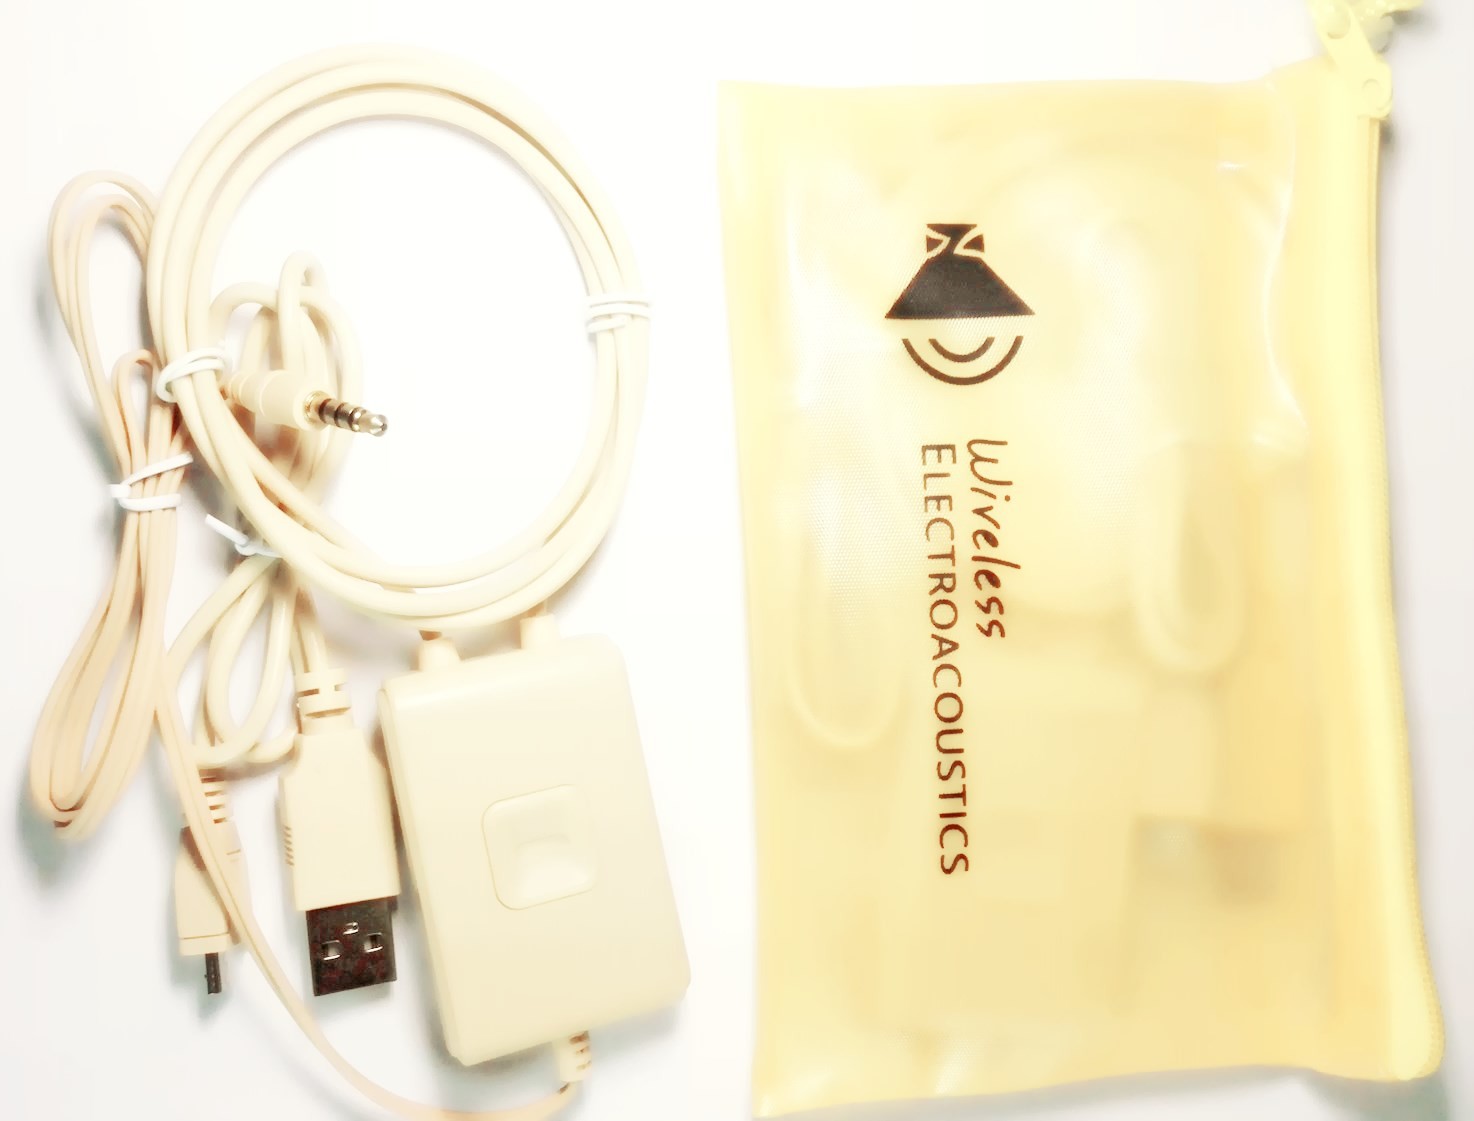 China 3W-Induction-Neckloop-Spy-Invisible-Tiny-Micro-Nano-Earpiece-Covert-Ear-Bug     3W-Induct  Made In China wholesale